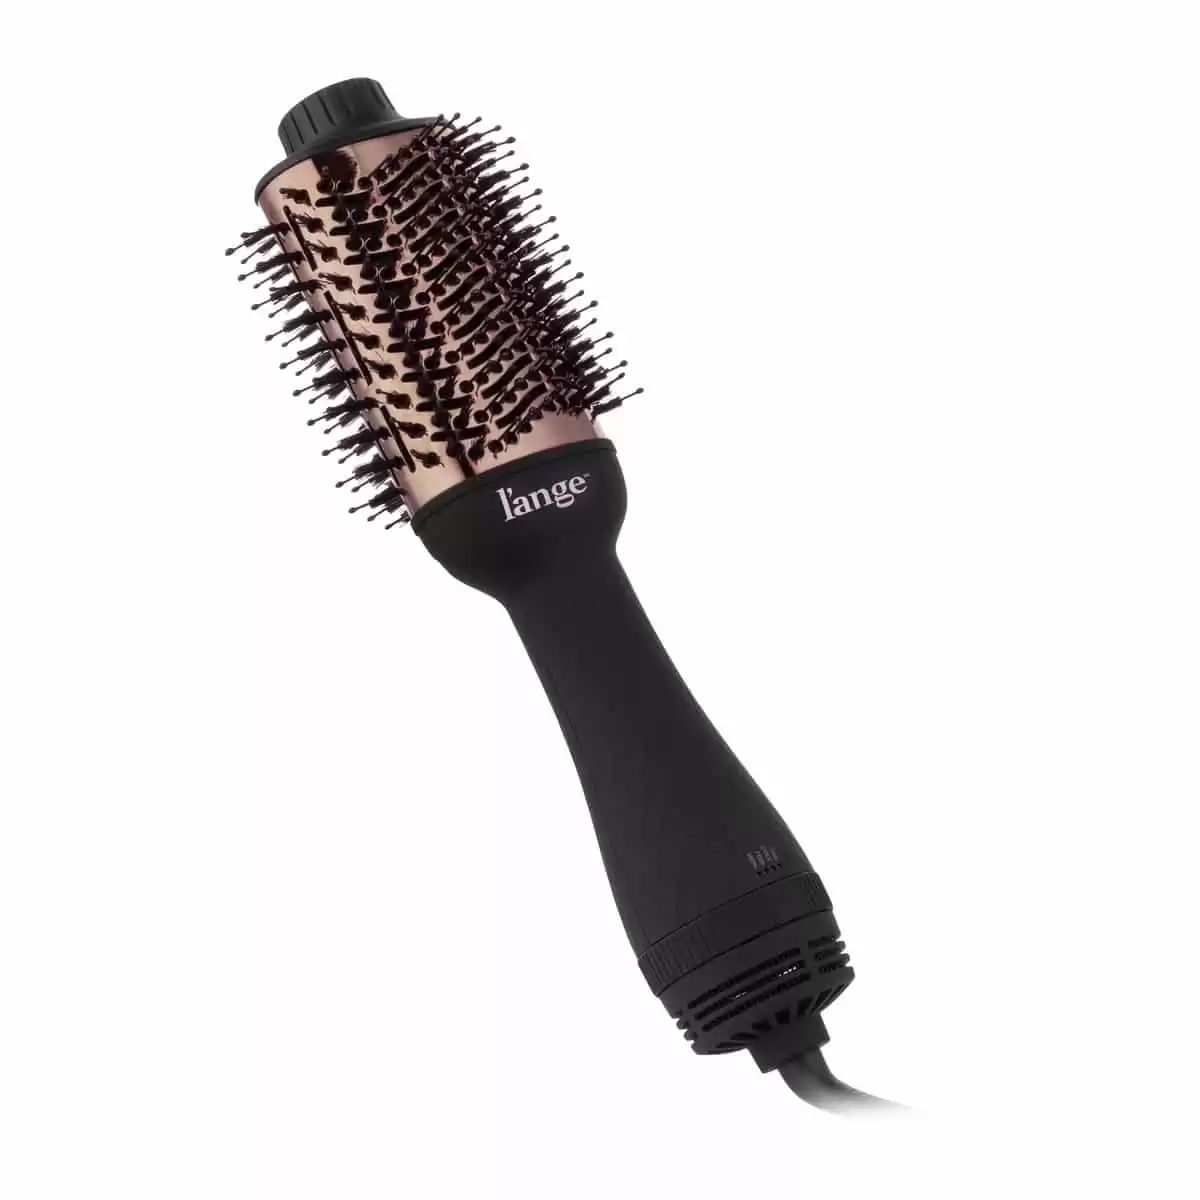 L'ANGE HAIR Le Volume 2-in-1 Titanium Brush Dryer Black | 60MM Hot Air Blow Dryer Brush in One with Oval Barrel | Hair Styler for Smooth, Frizz-Free Results for All Hair Types